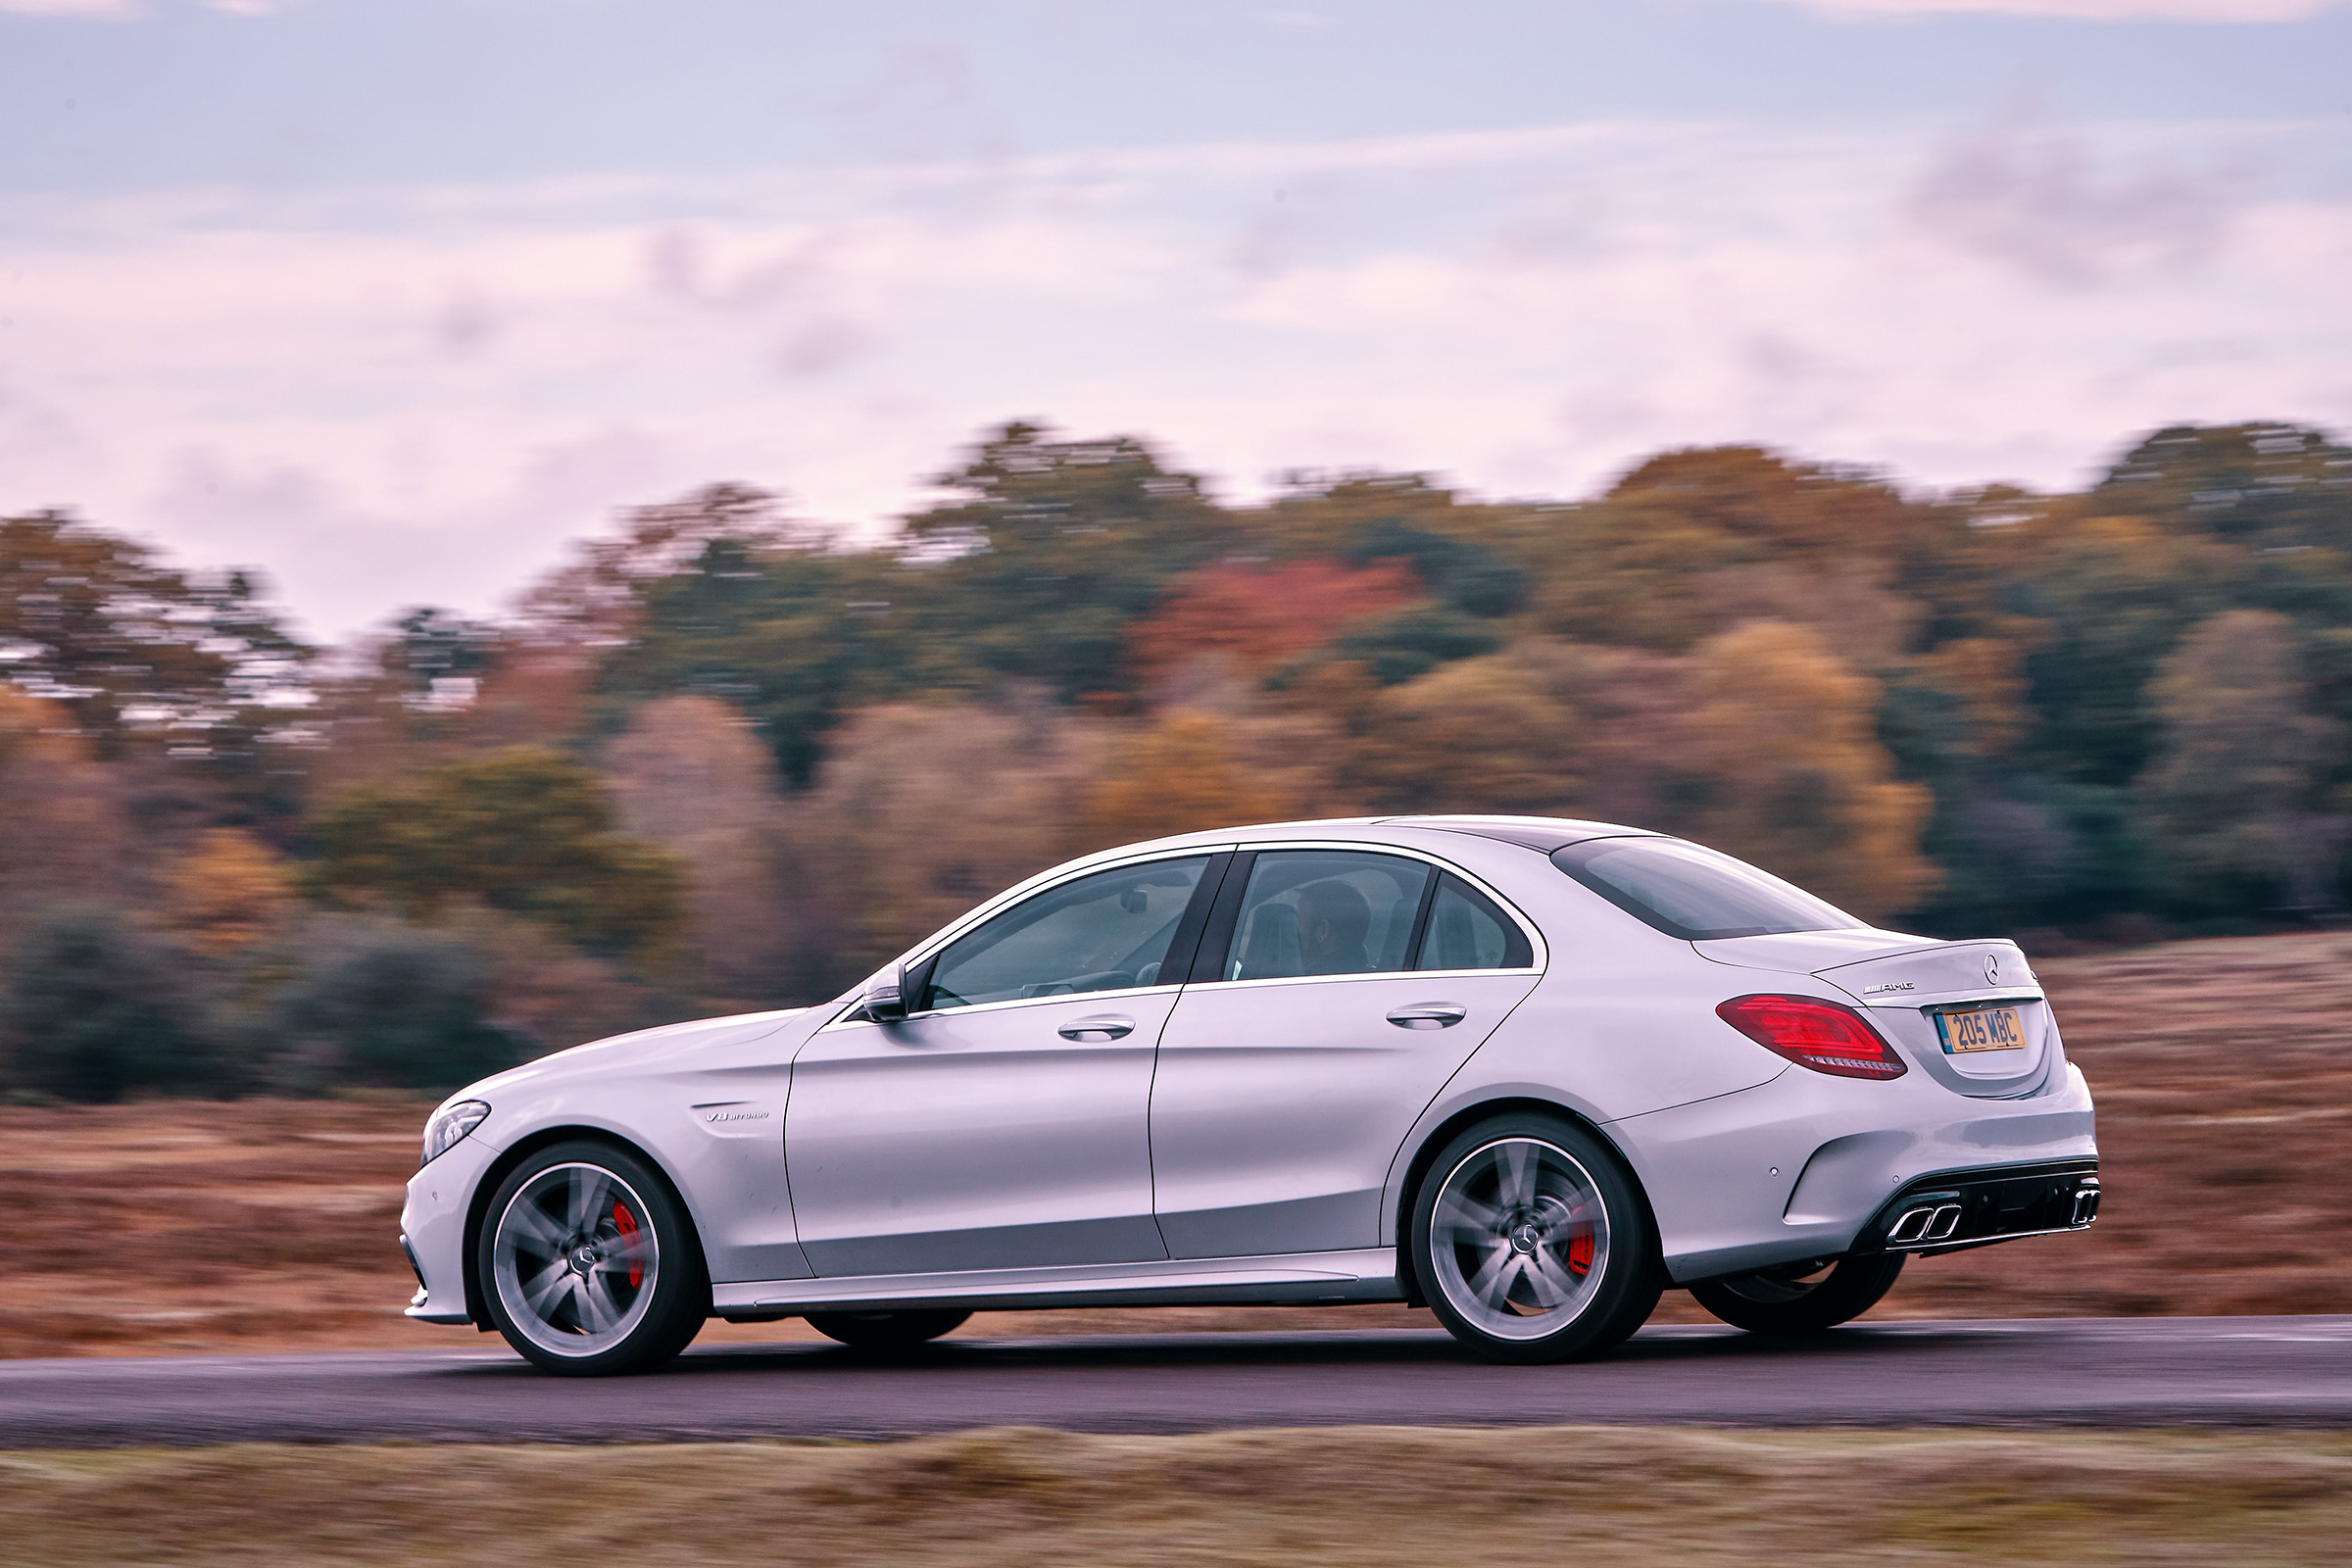 Mercedes AMG C63 (W205) review, specs, stats, comparison, rivals, data,  details, photos and information on